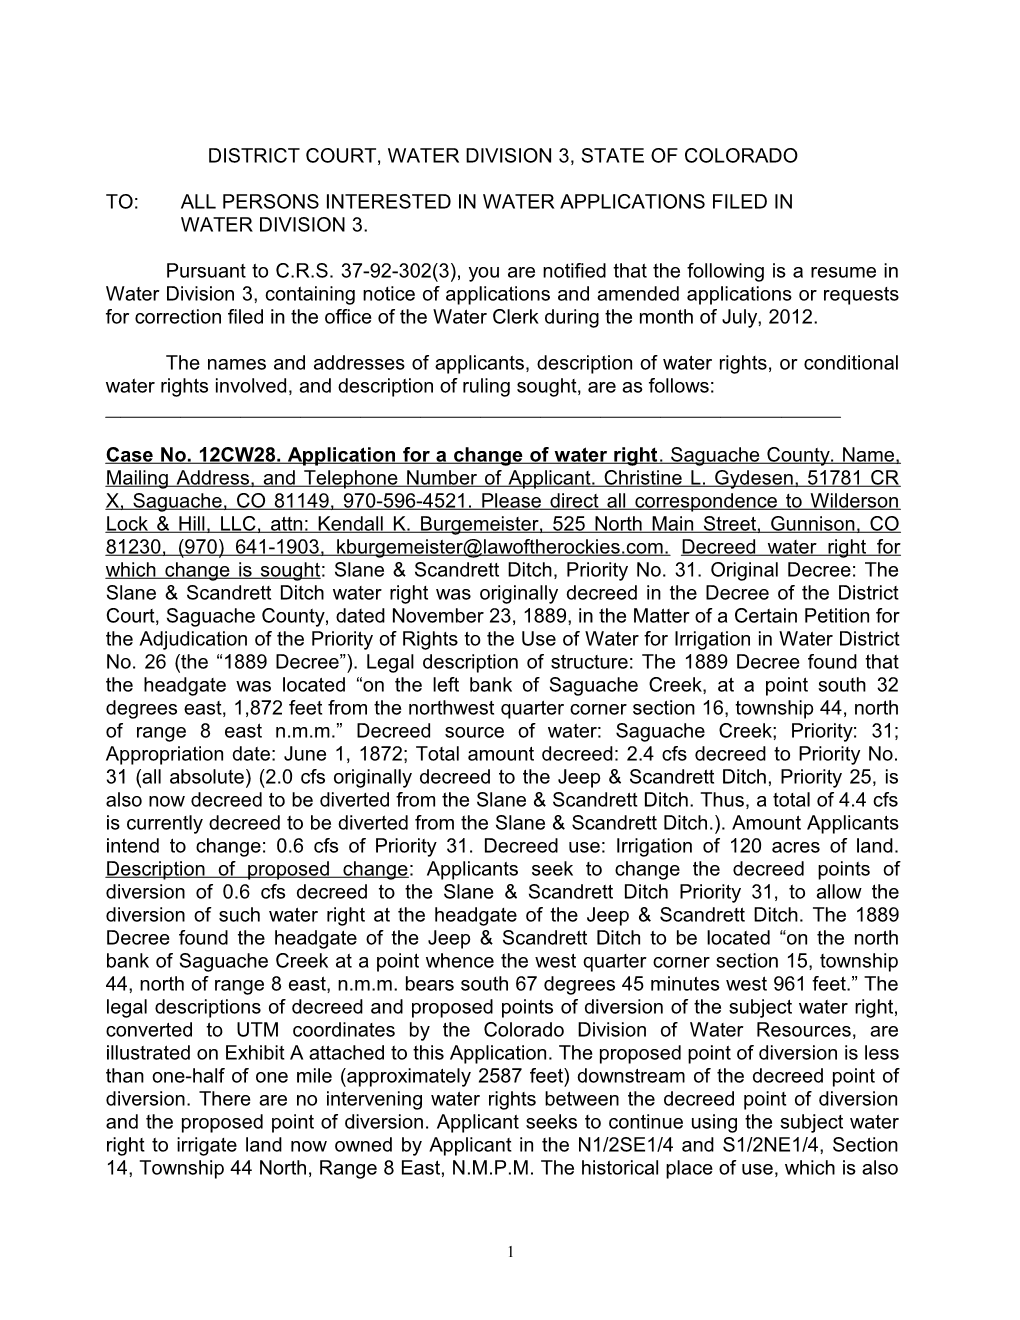 District Court, Water Division 3, State of Colorado s1